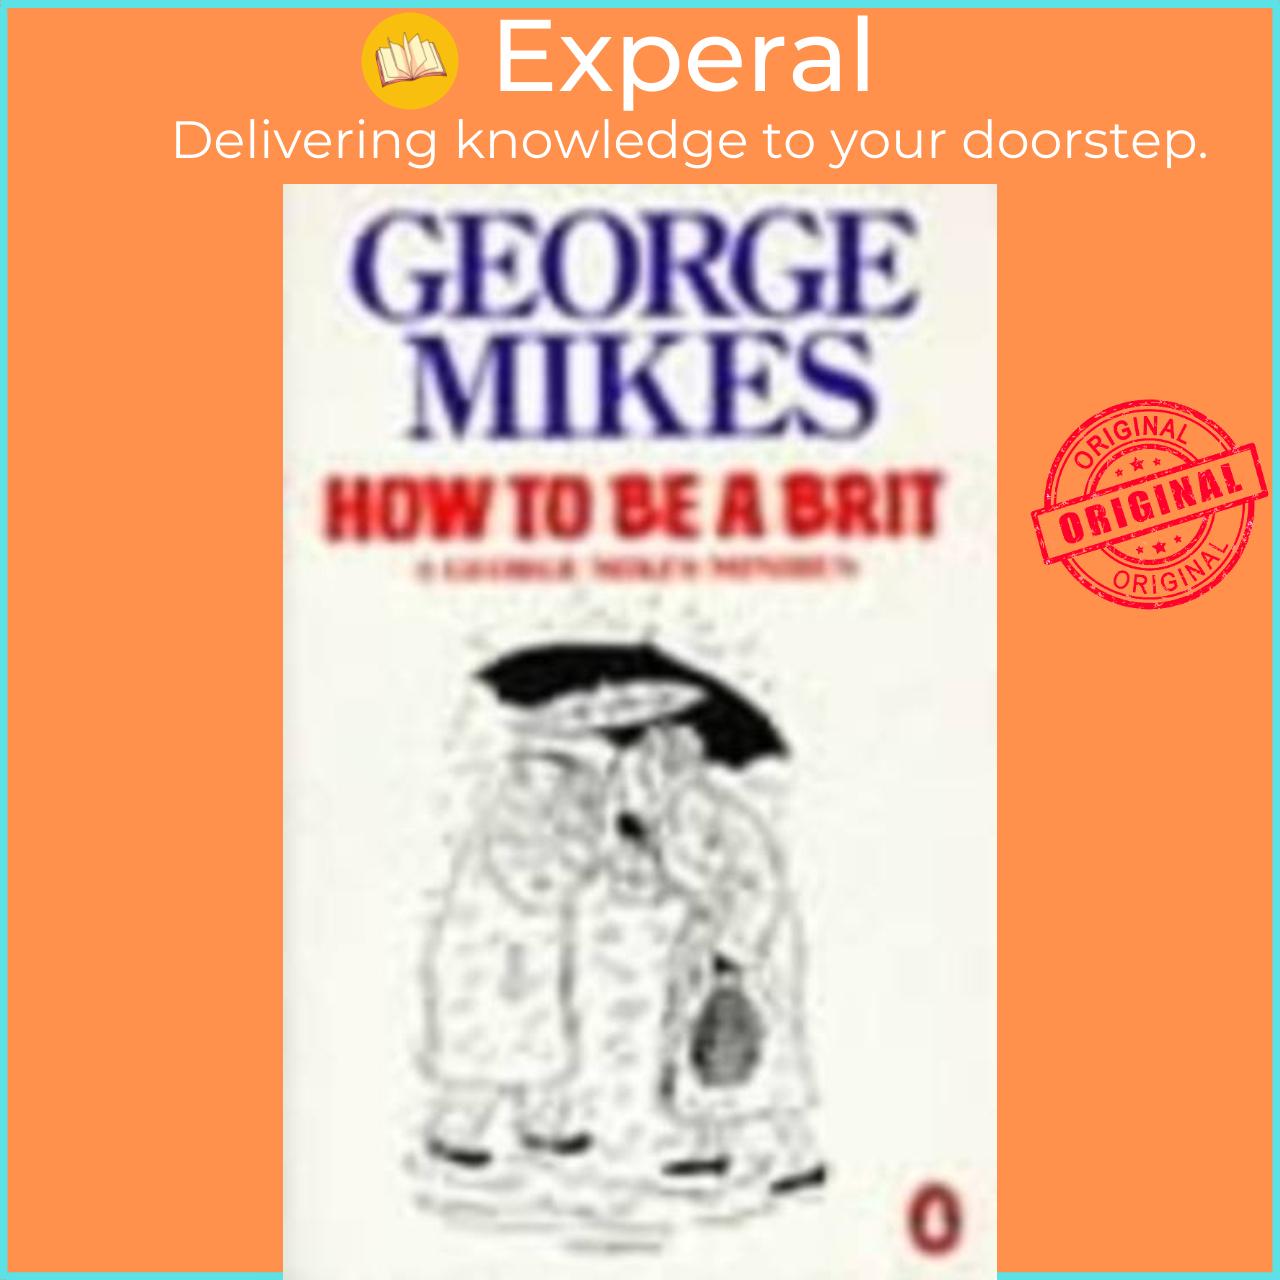 Hình ảnh Sách - How to be a Brit - The Classic Bestselling Guide by George Mikes (UK edition, paperback)